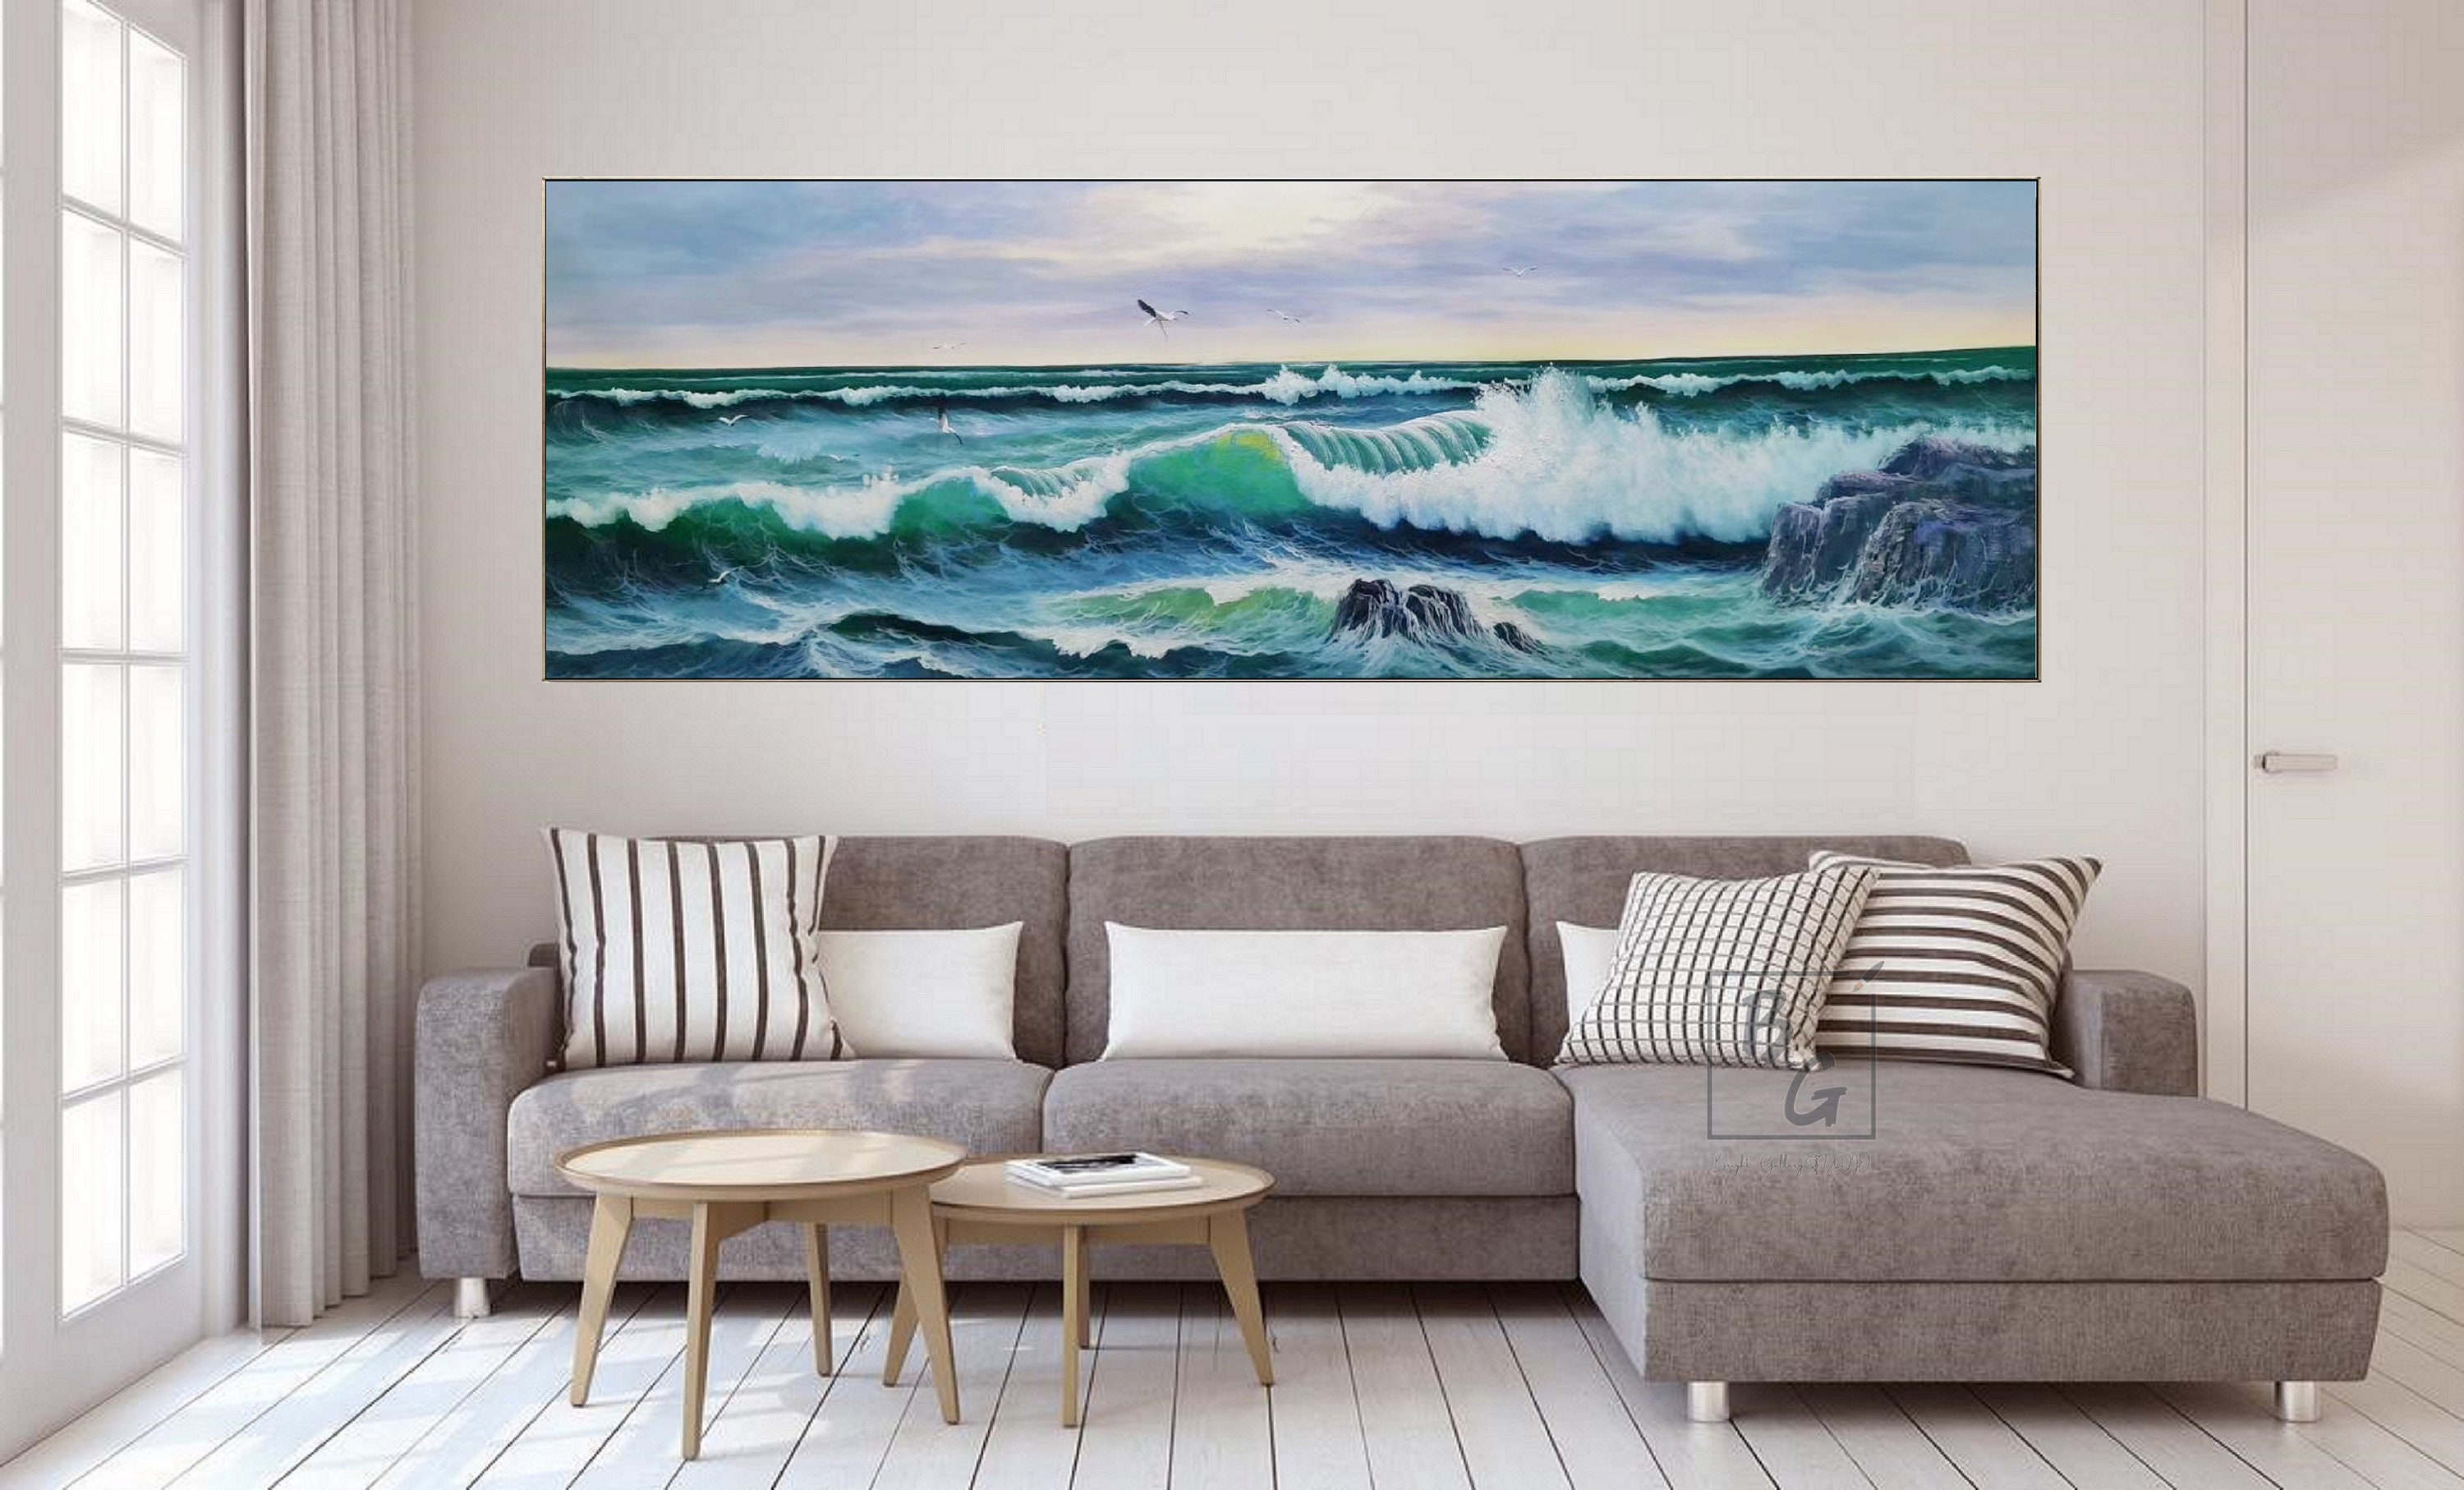 Large Sky and Sea Paintinglarge Abstract Paintingpaintings - Etsy